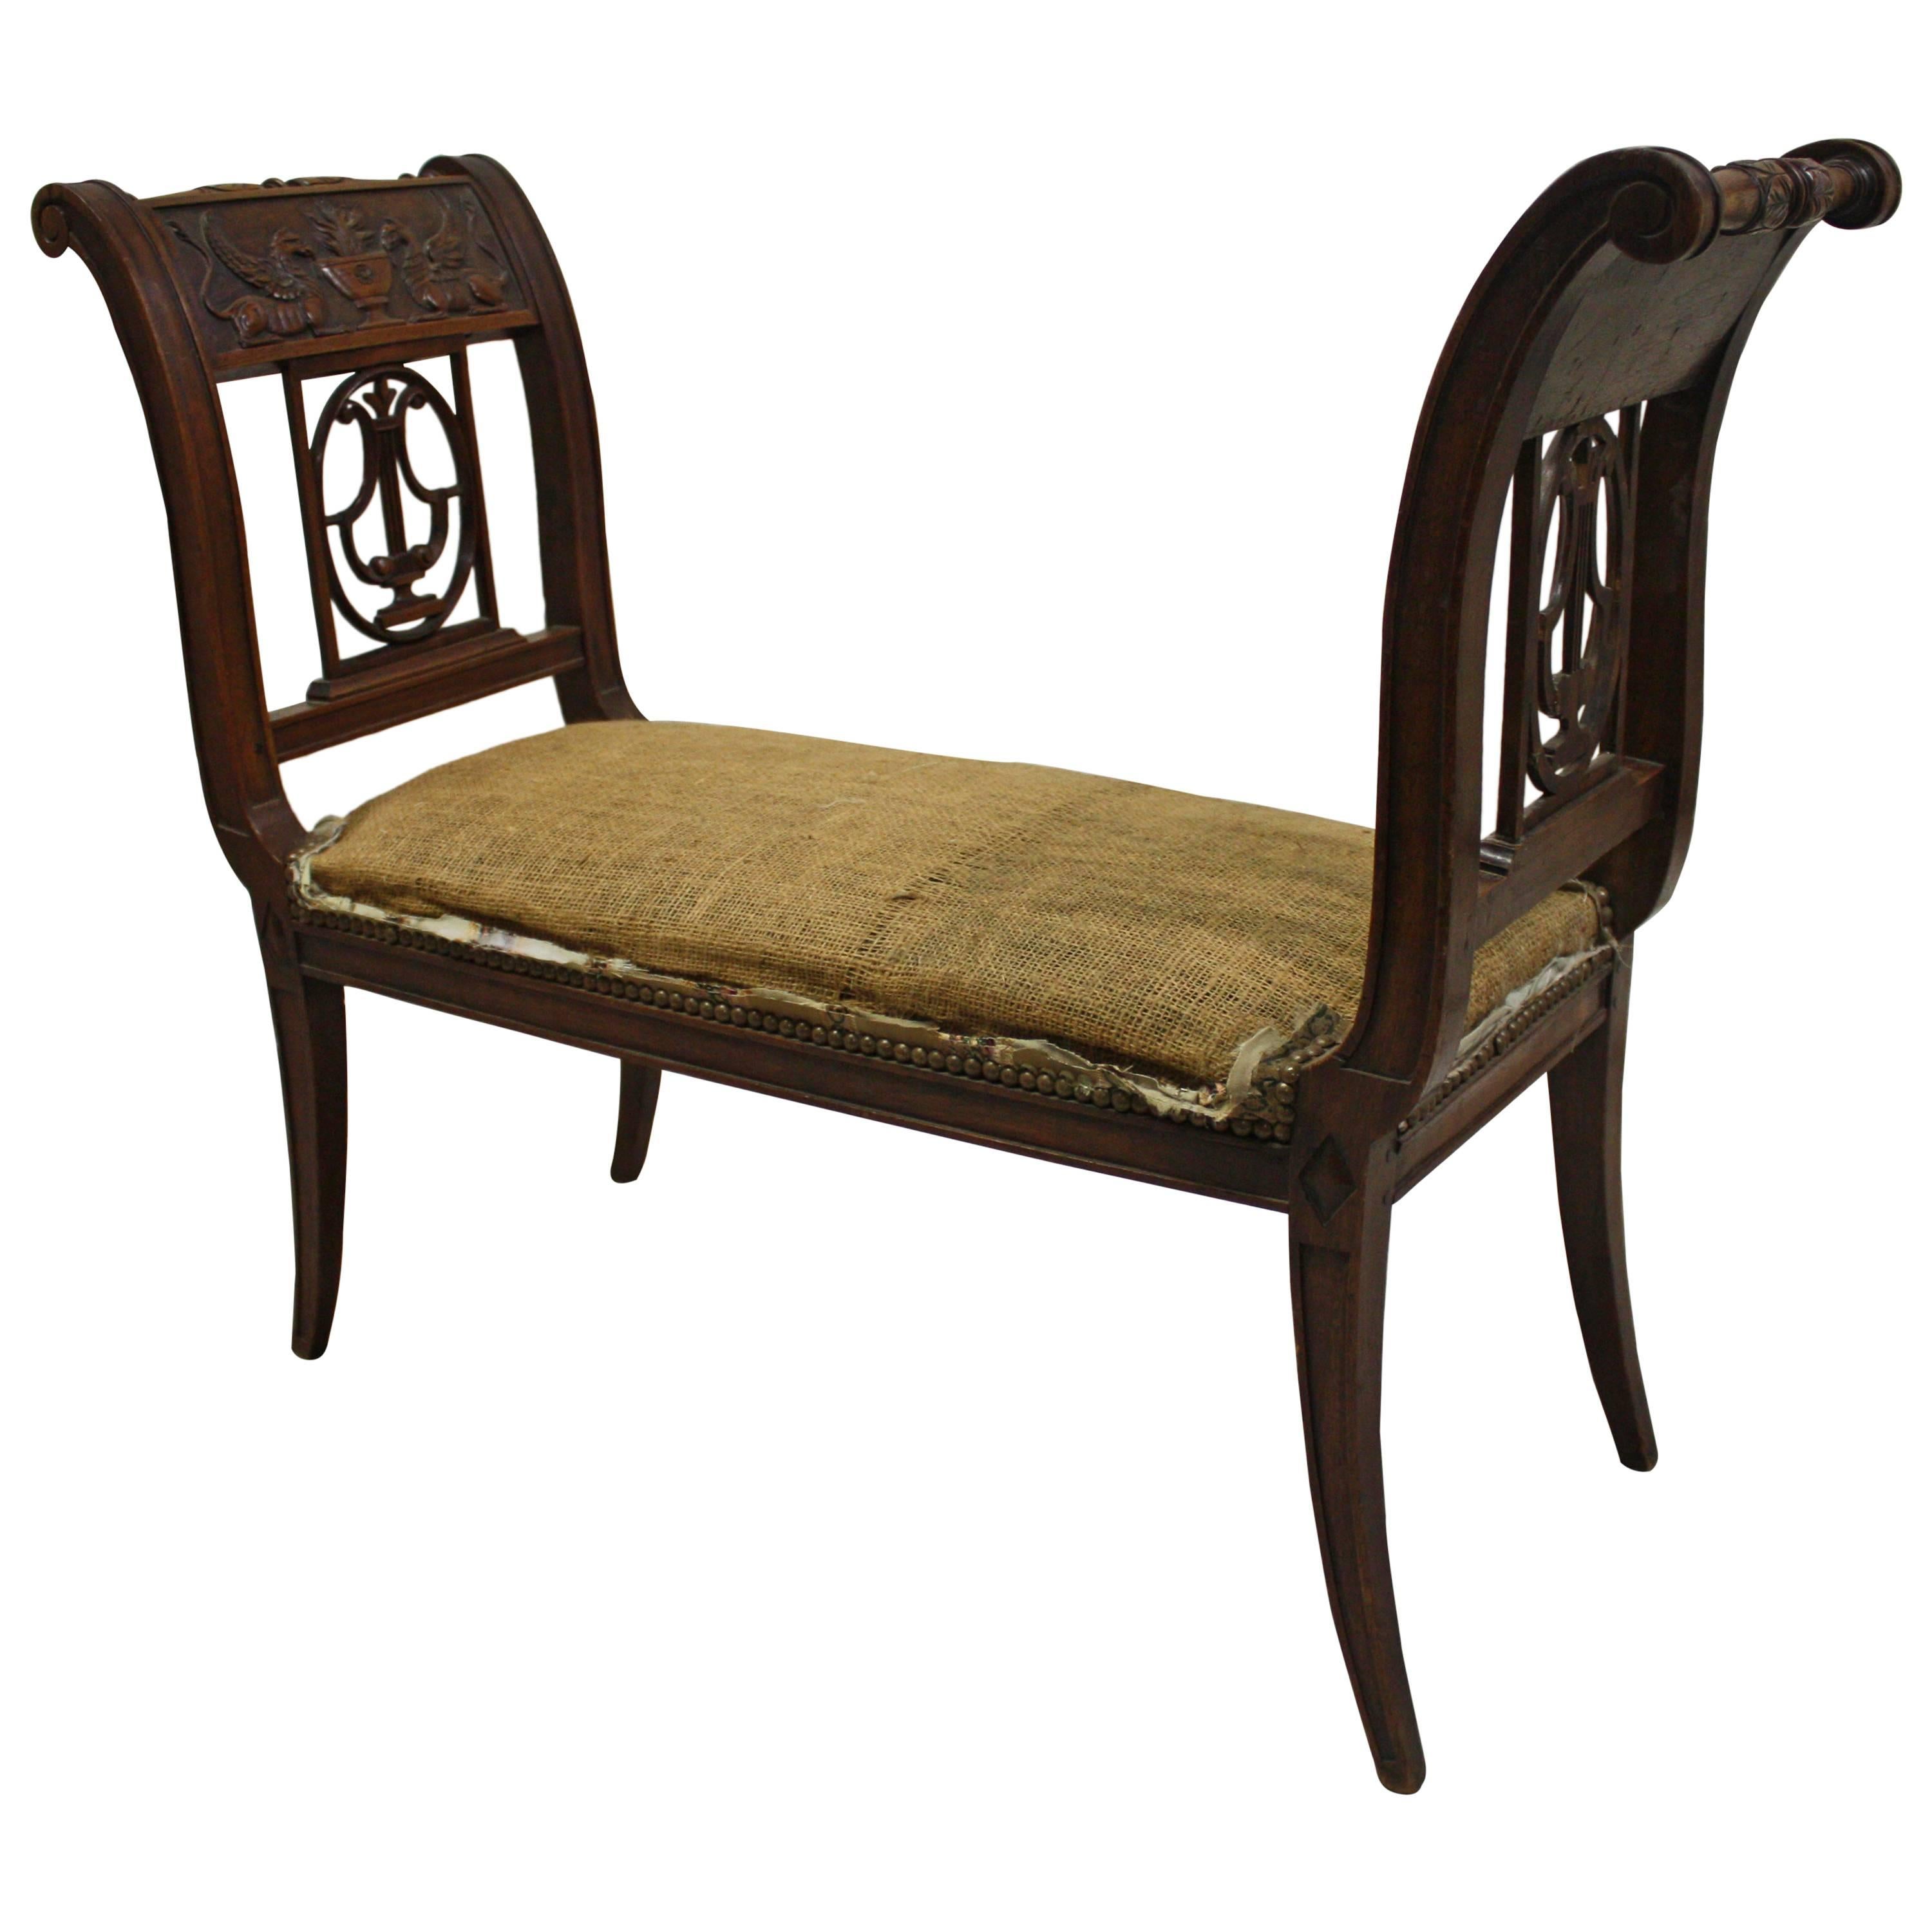 Charming 19th Century Directoire Bench